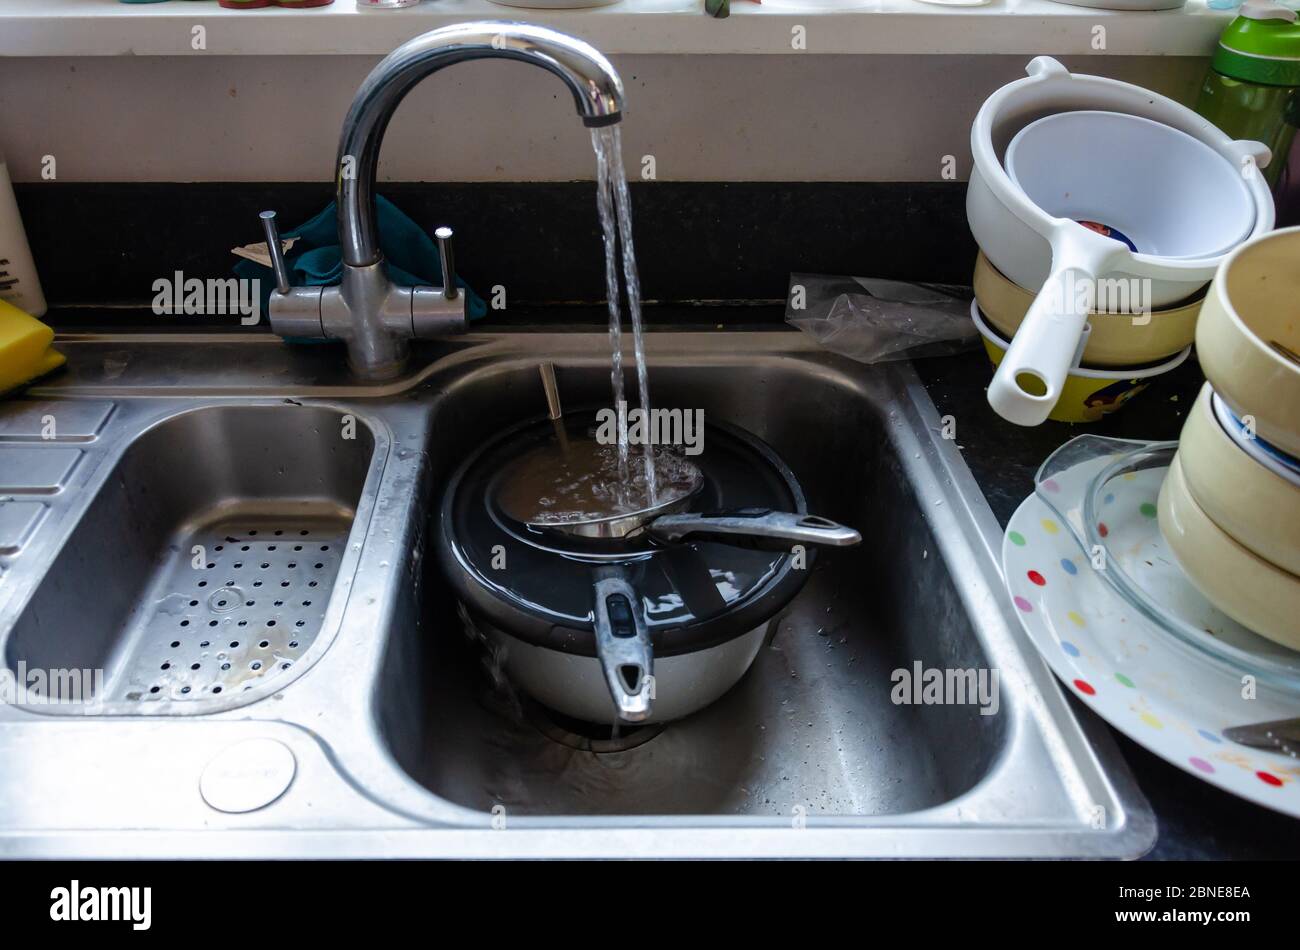 Running water from a tap fills saucepans soaking in a kitchen sink. Dishes are stacked ready to wash up. Stock Photo